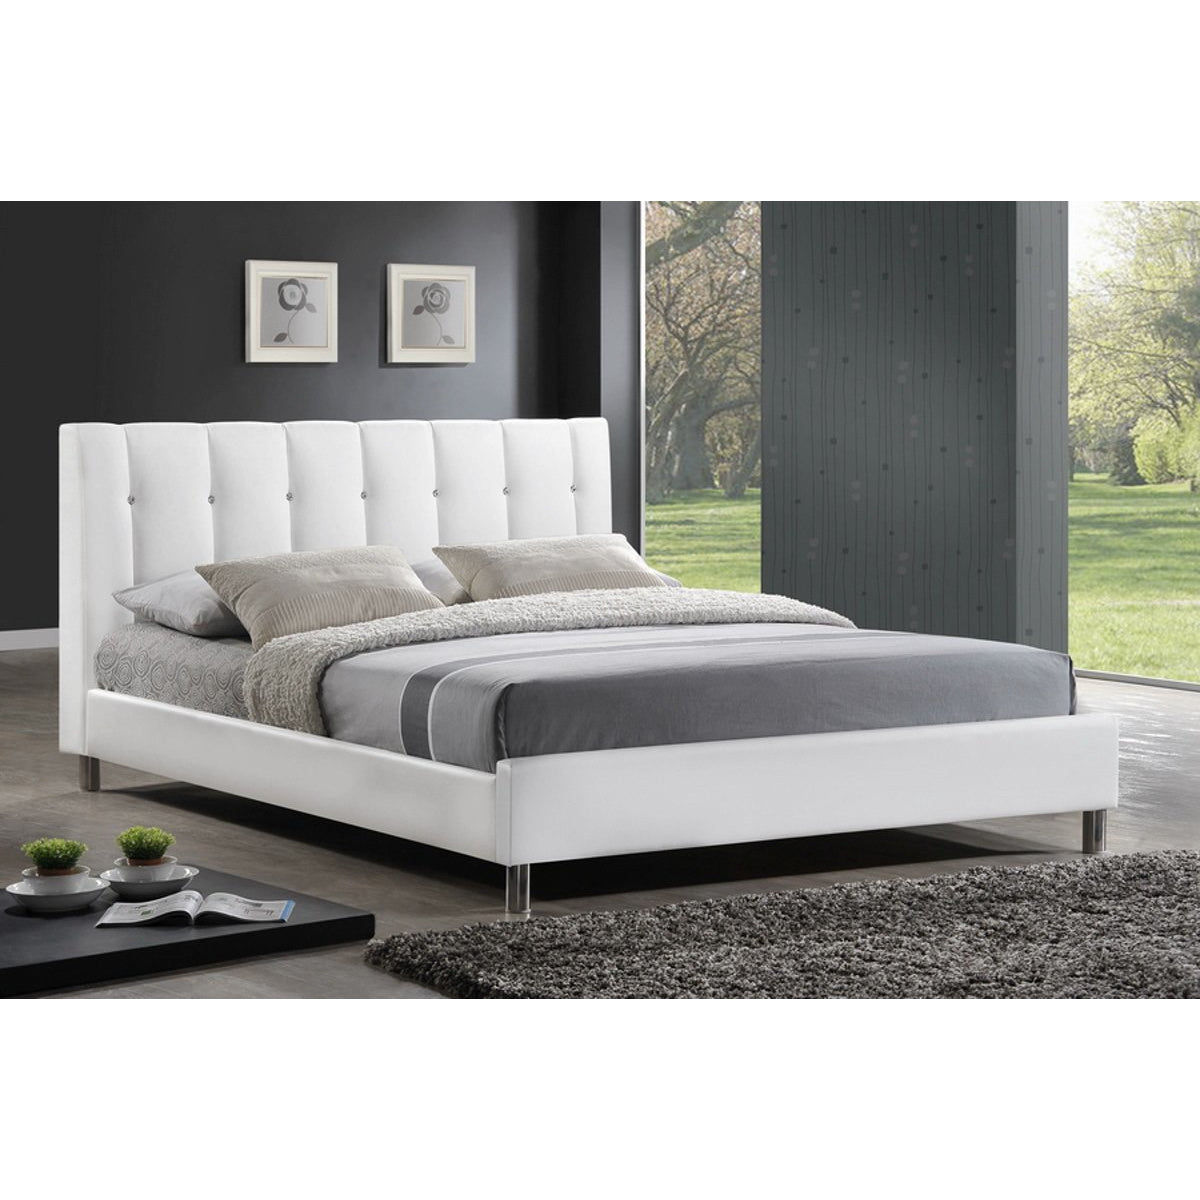 Baxton Studio Vino White Modern Bed with Upholstered Headboard - Queen Size  Baxton Studio-beds-Minimal And Modern - 1